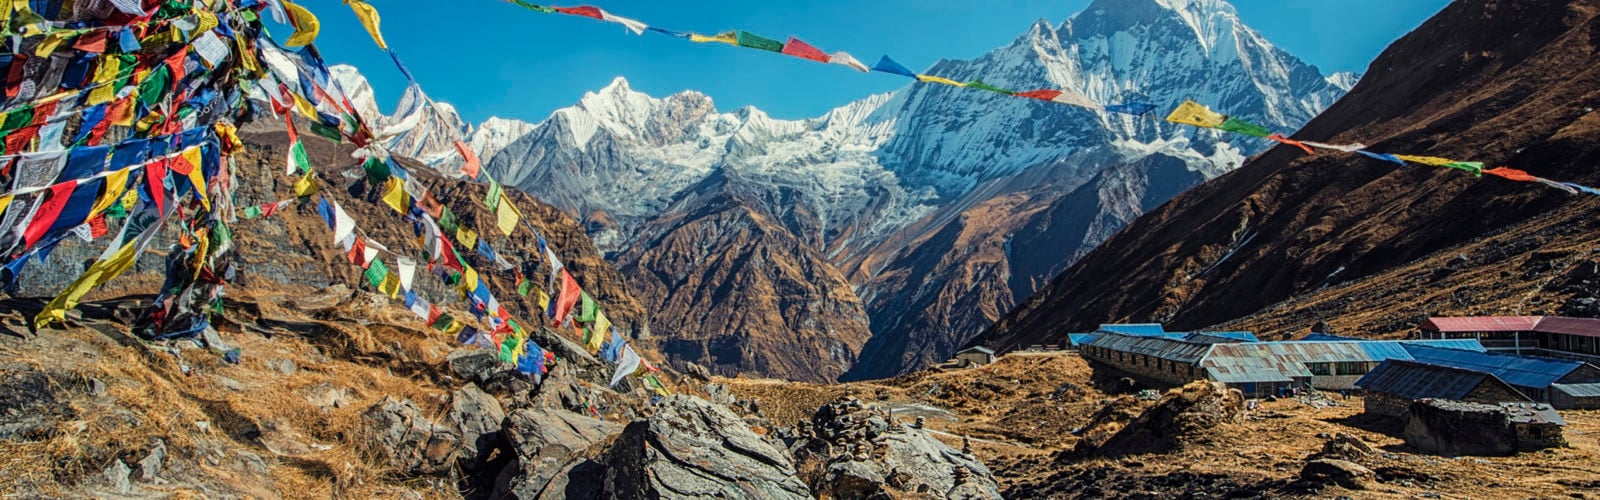 View from Annapurna base camp